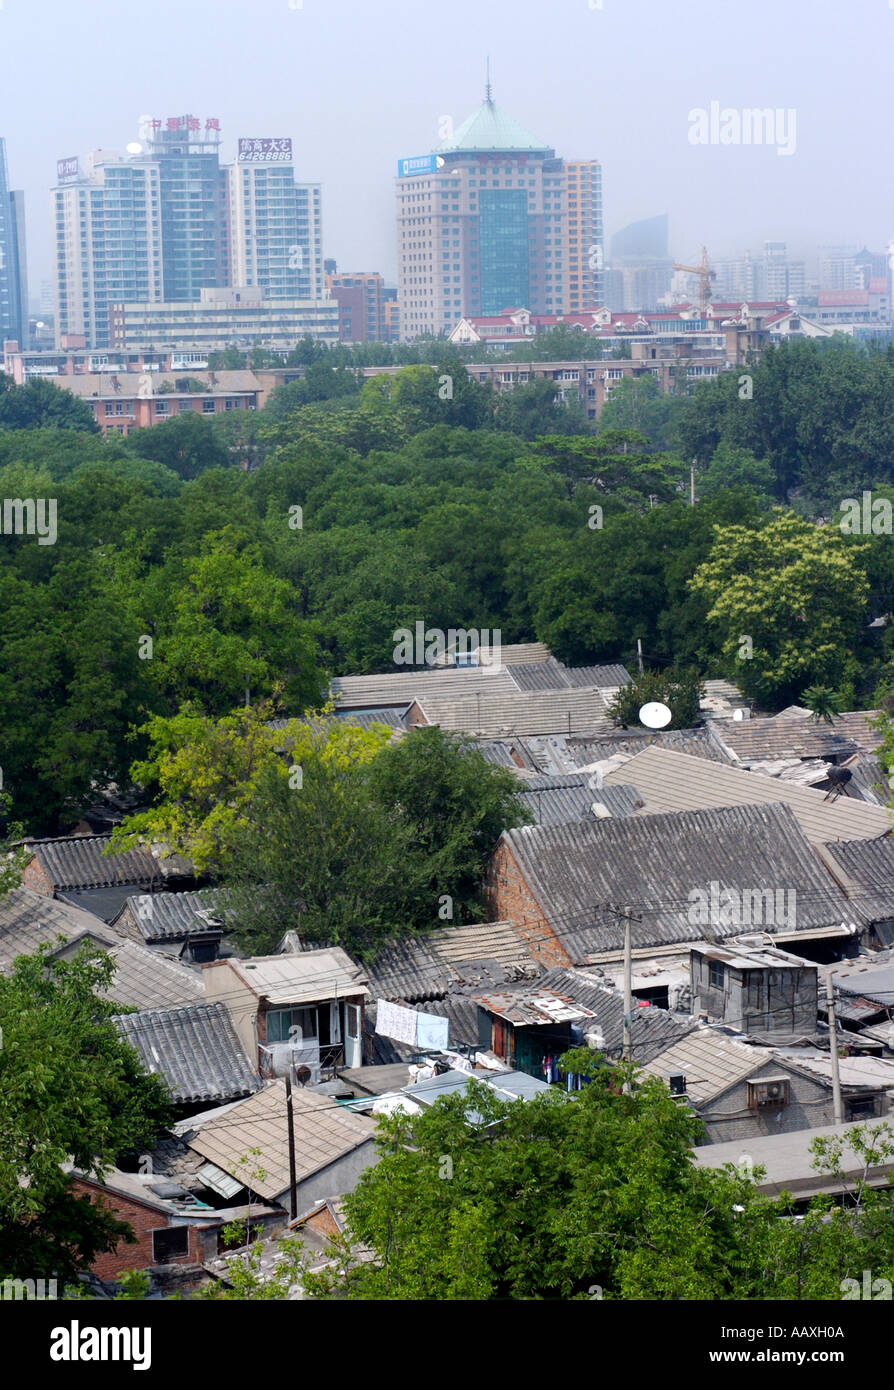 Rooftops of old houses in Beijing hutongs with new office developments in the distance 2005 China Stock Photo